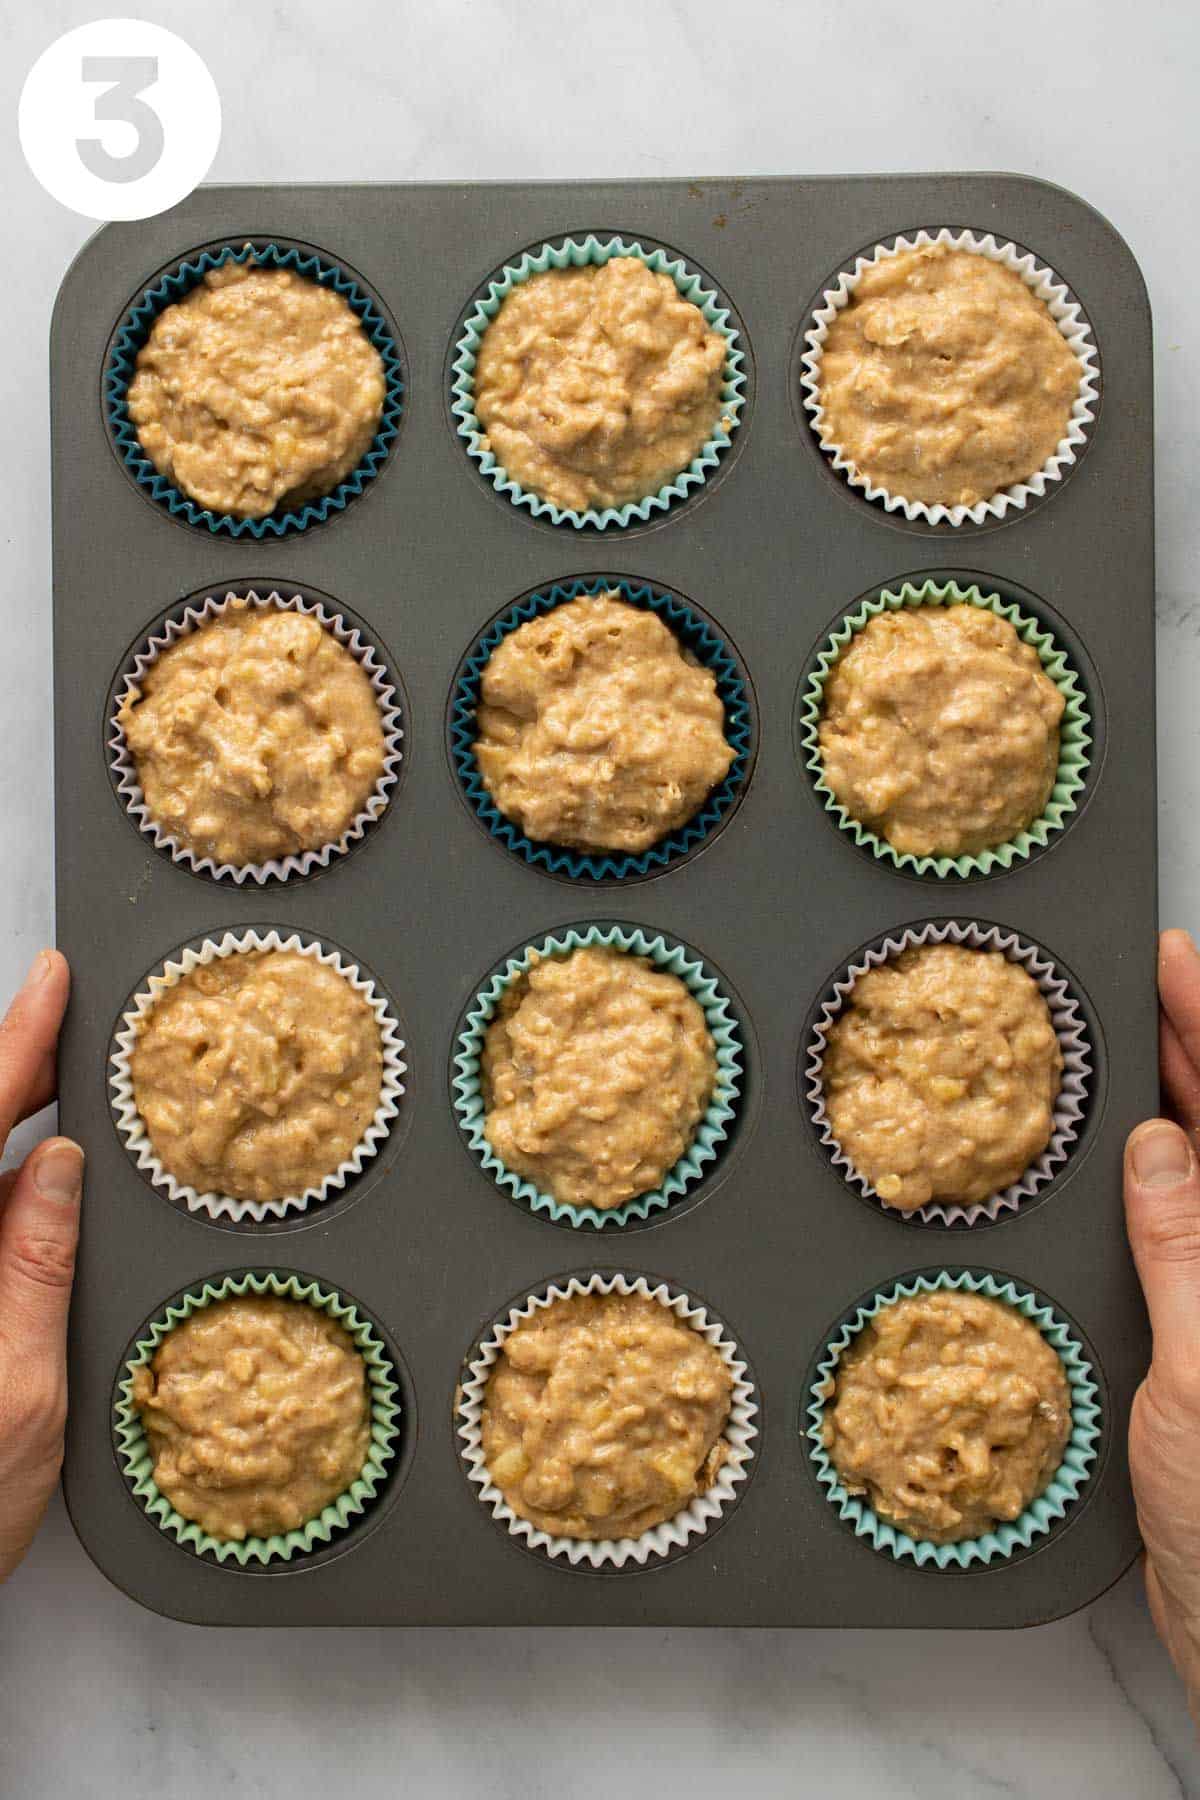 Holding a muffin pan with unbaked batter. Labeled with a "3" in upper left corner.